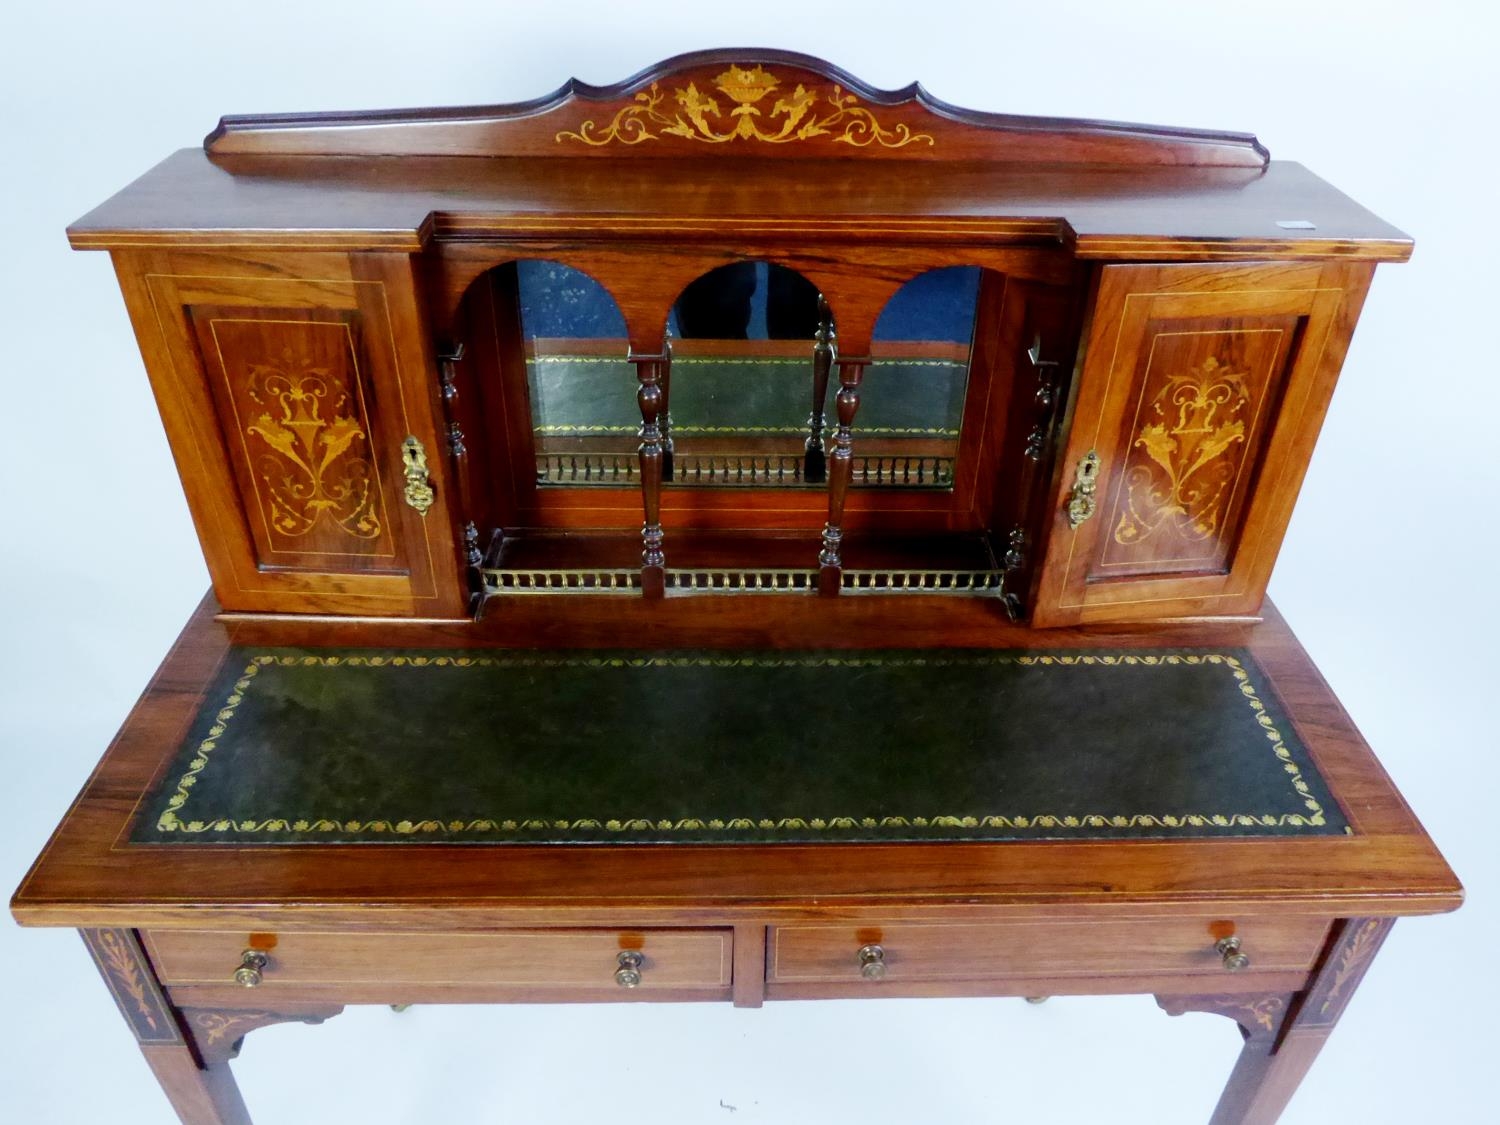 MAPLE & Co Ltd, EDWARDIAN MARQUETRY INLAID ROSEWOOD LADY?S WRITING DESK, the moulded oblong top with - Image 2 of 2